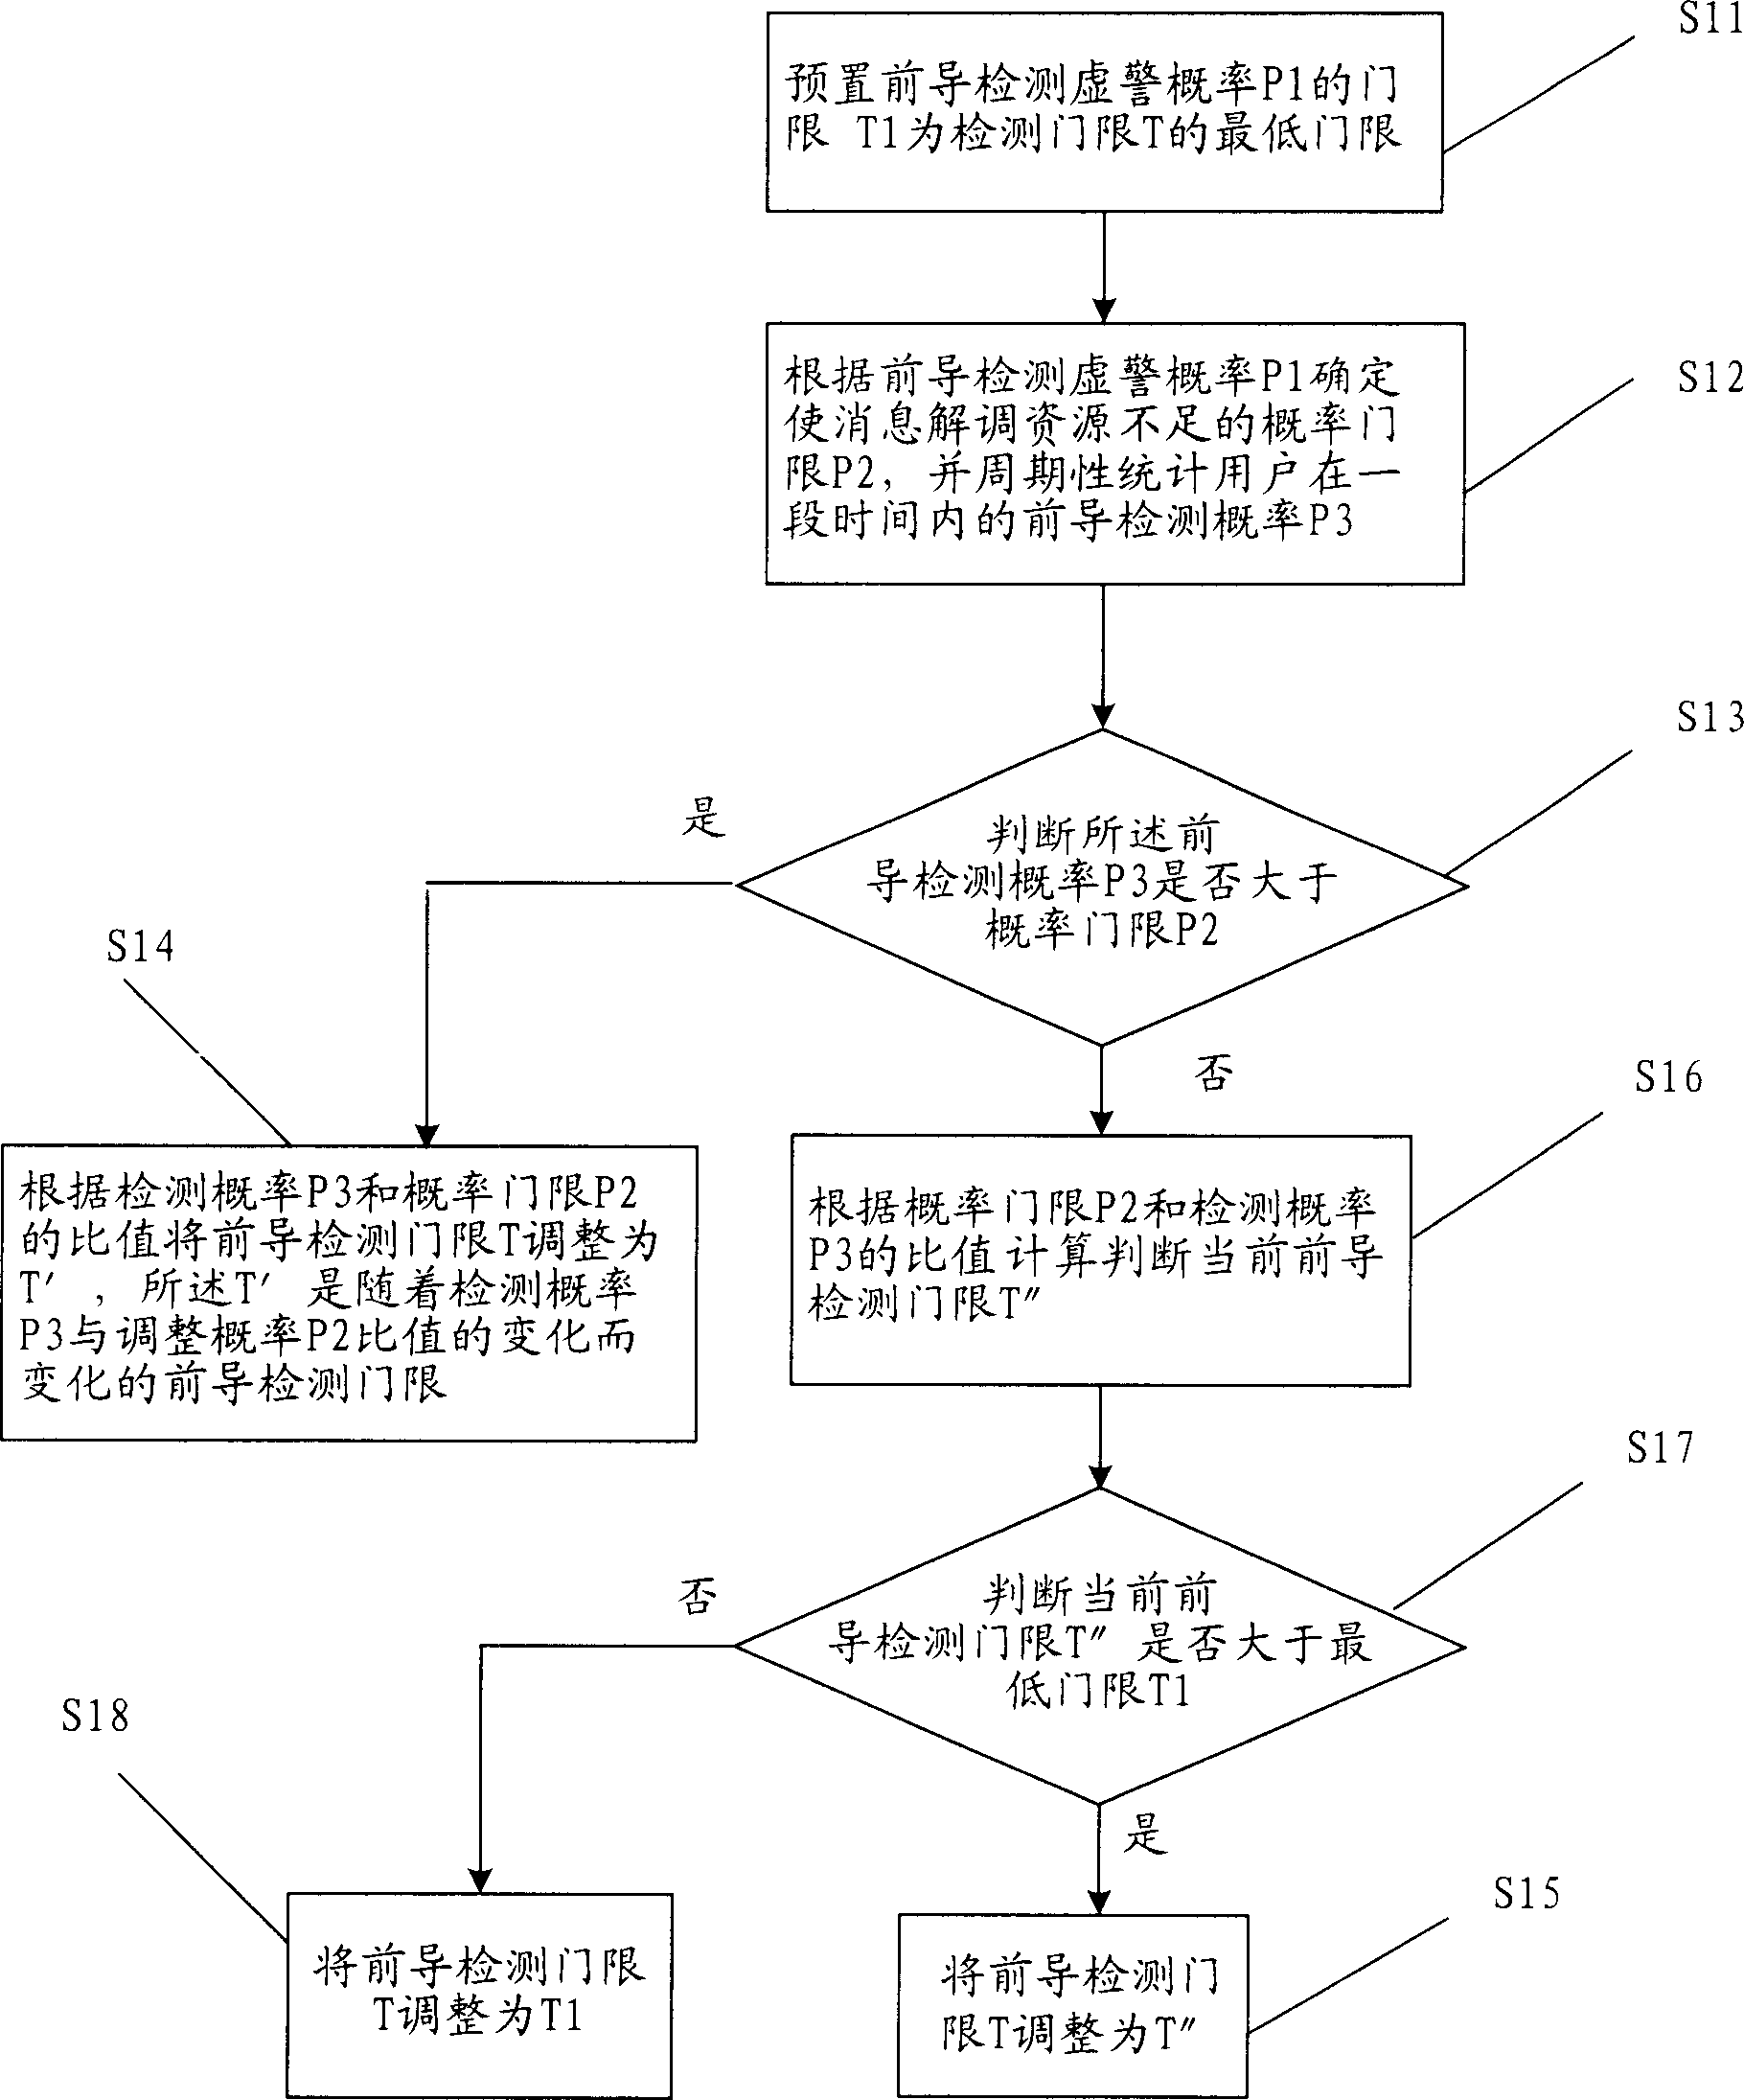 Method for dynamic adjusting leading detection threshold of access